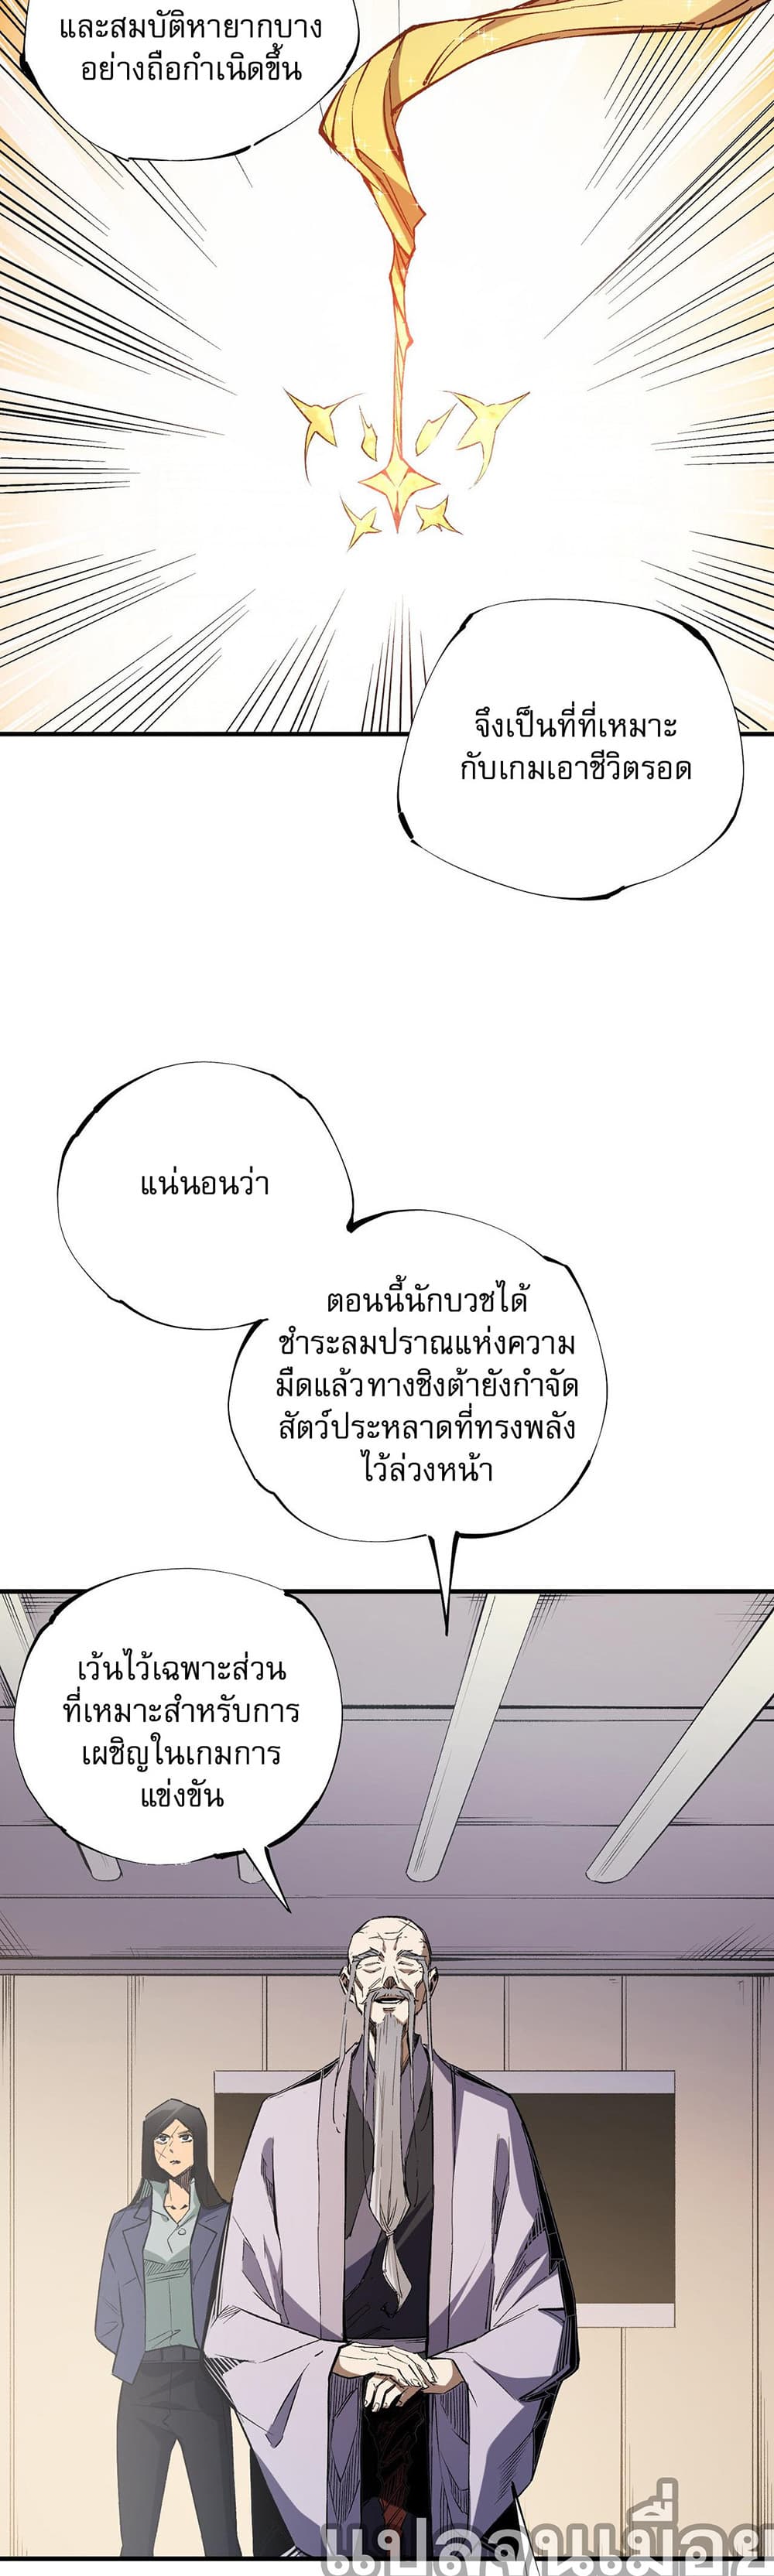 Job Changing for the Entire Population: The Jobless Me Will Terminate the Gods ฉันคือผู้เล่นไร้อาชีพที่สังหารเหล่าเทพ 39-39